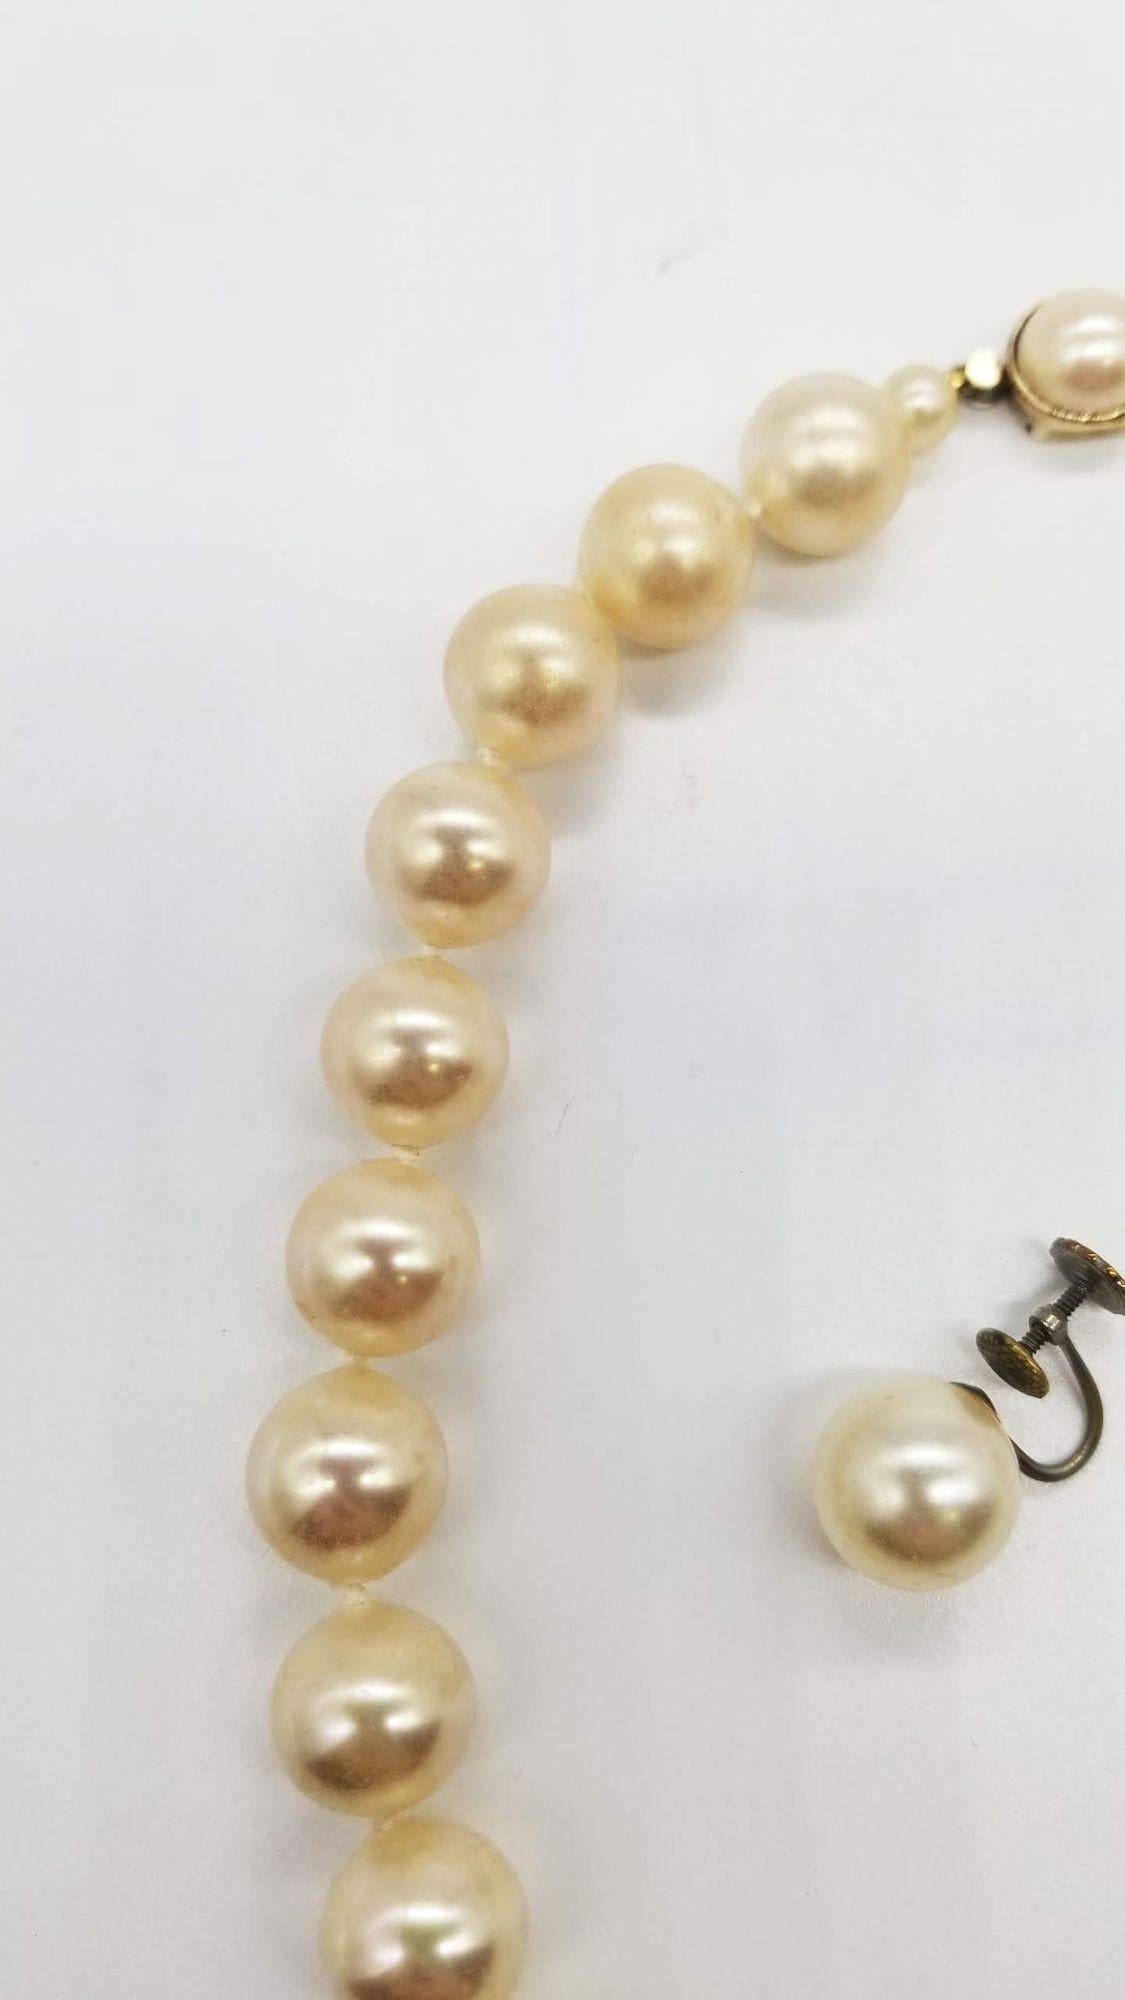 Plastic Marvella Faux Pearl Necklace and Earrings Set For Sale